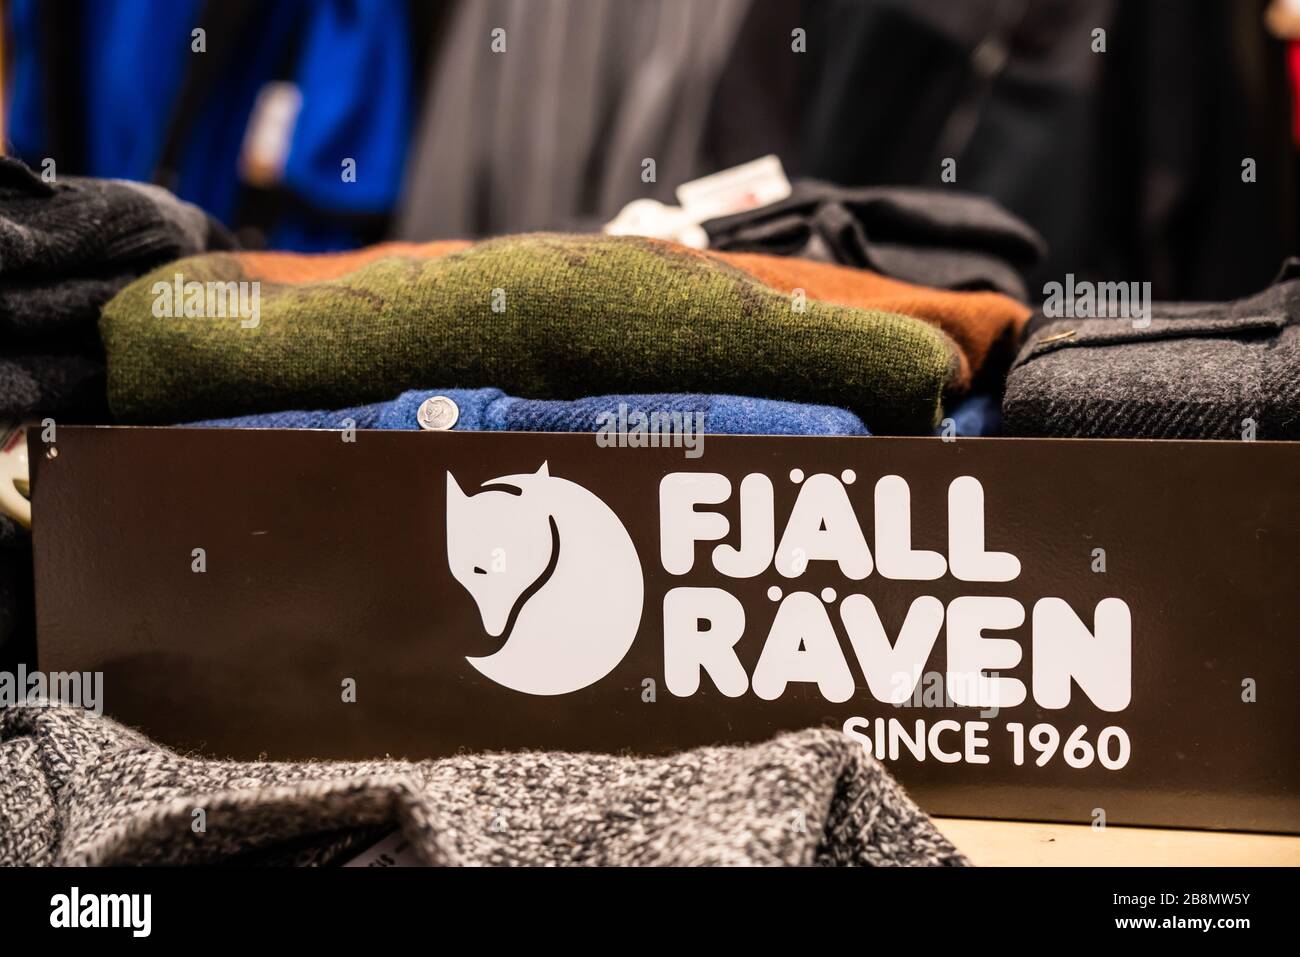 Fjallraven stall seen in a Macy's department store in New York City. Stock Photo